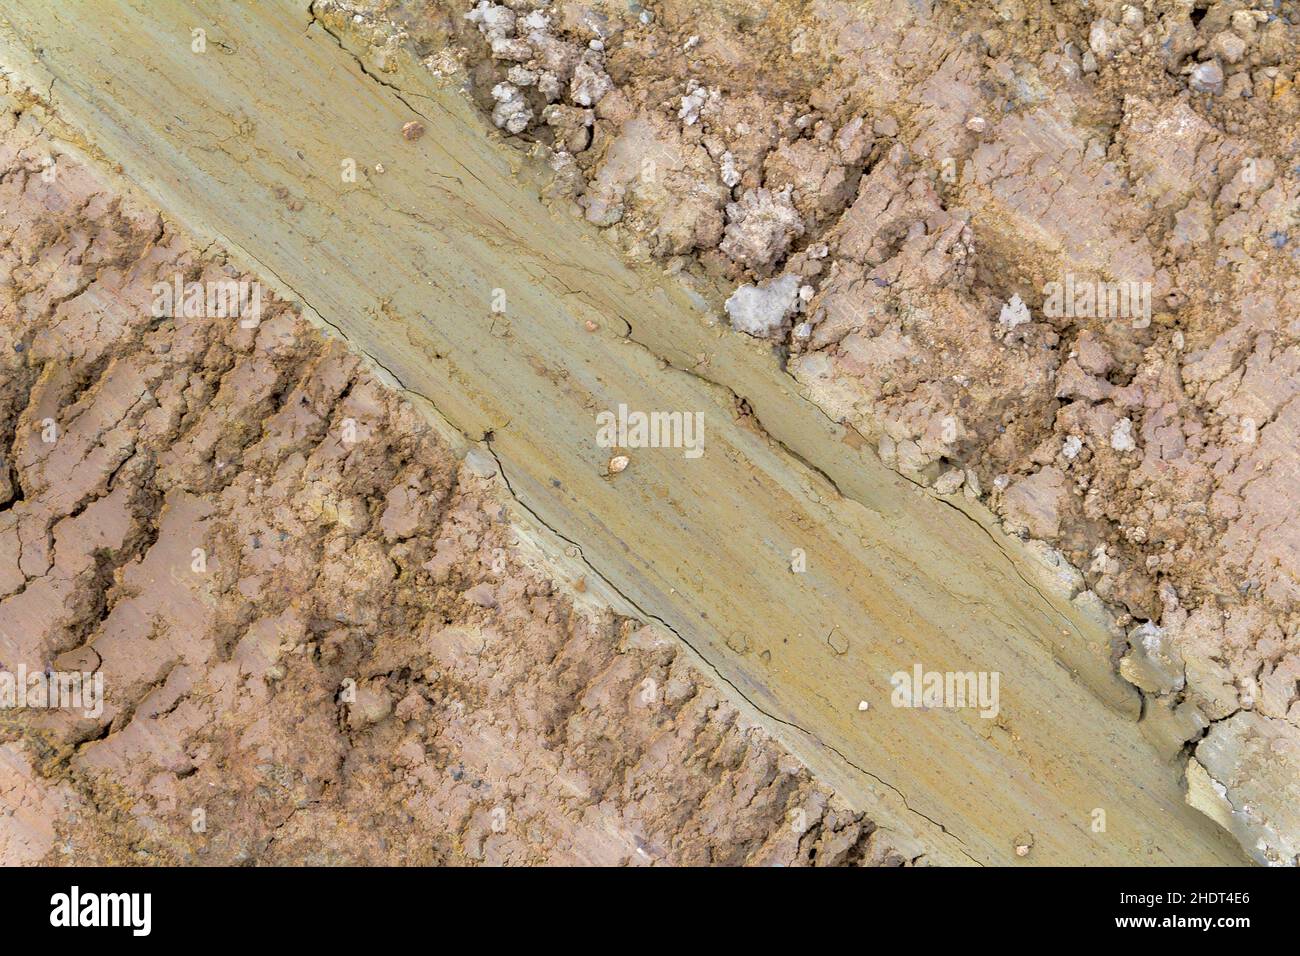 earth, clay, mud, earths, clays, muds Stock Photo